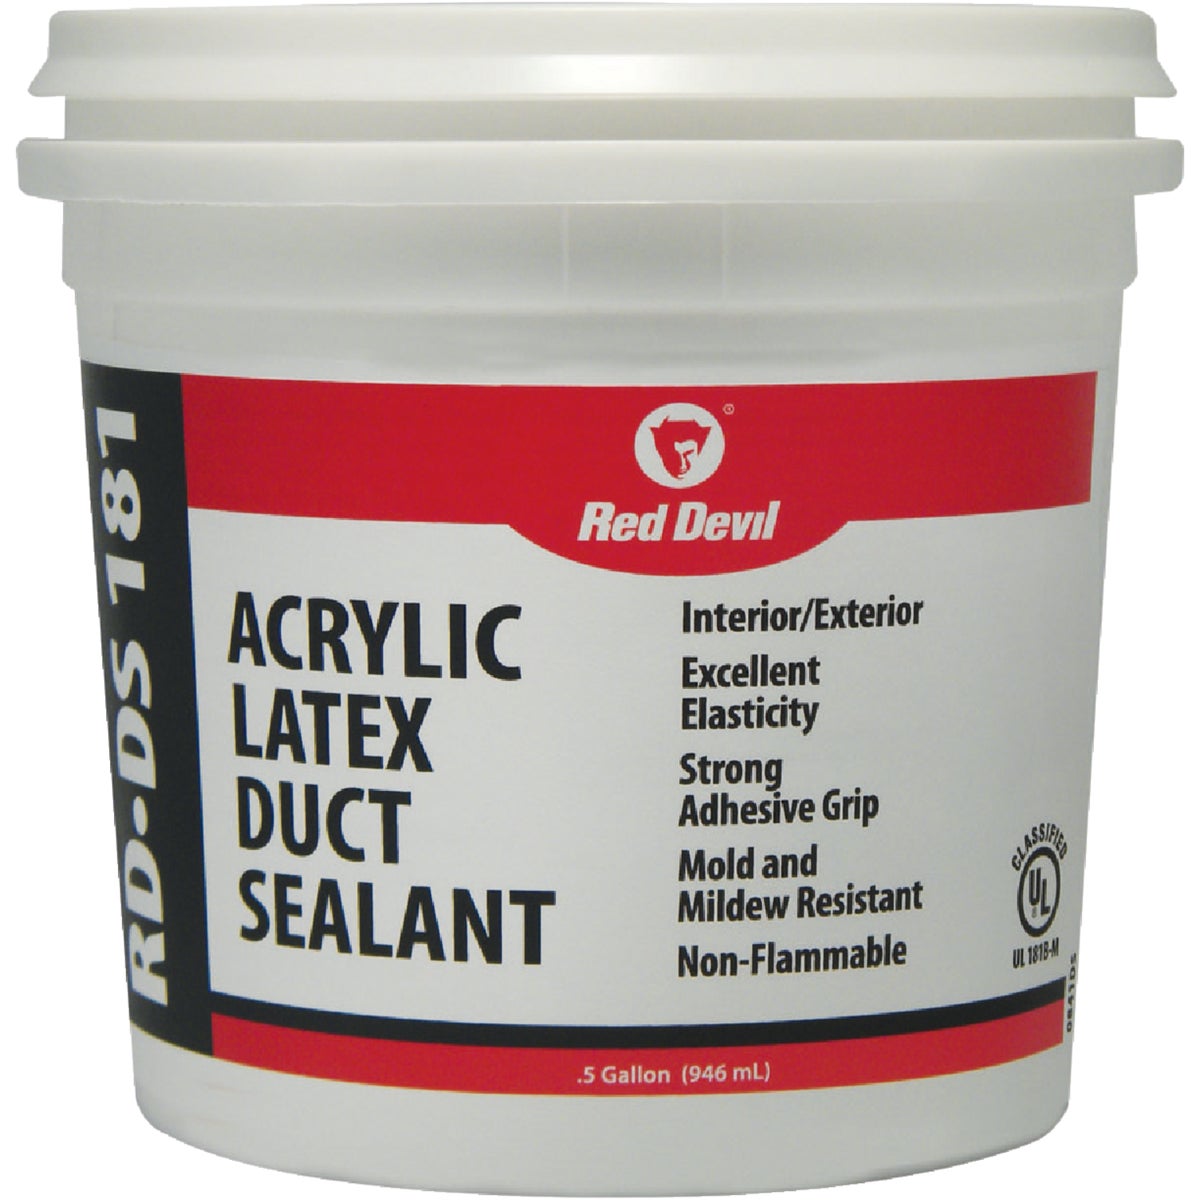 Red Devil RD-DS 181 0.5 Gal. Acrylic Latex Duct Sealant, Gray